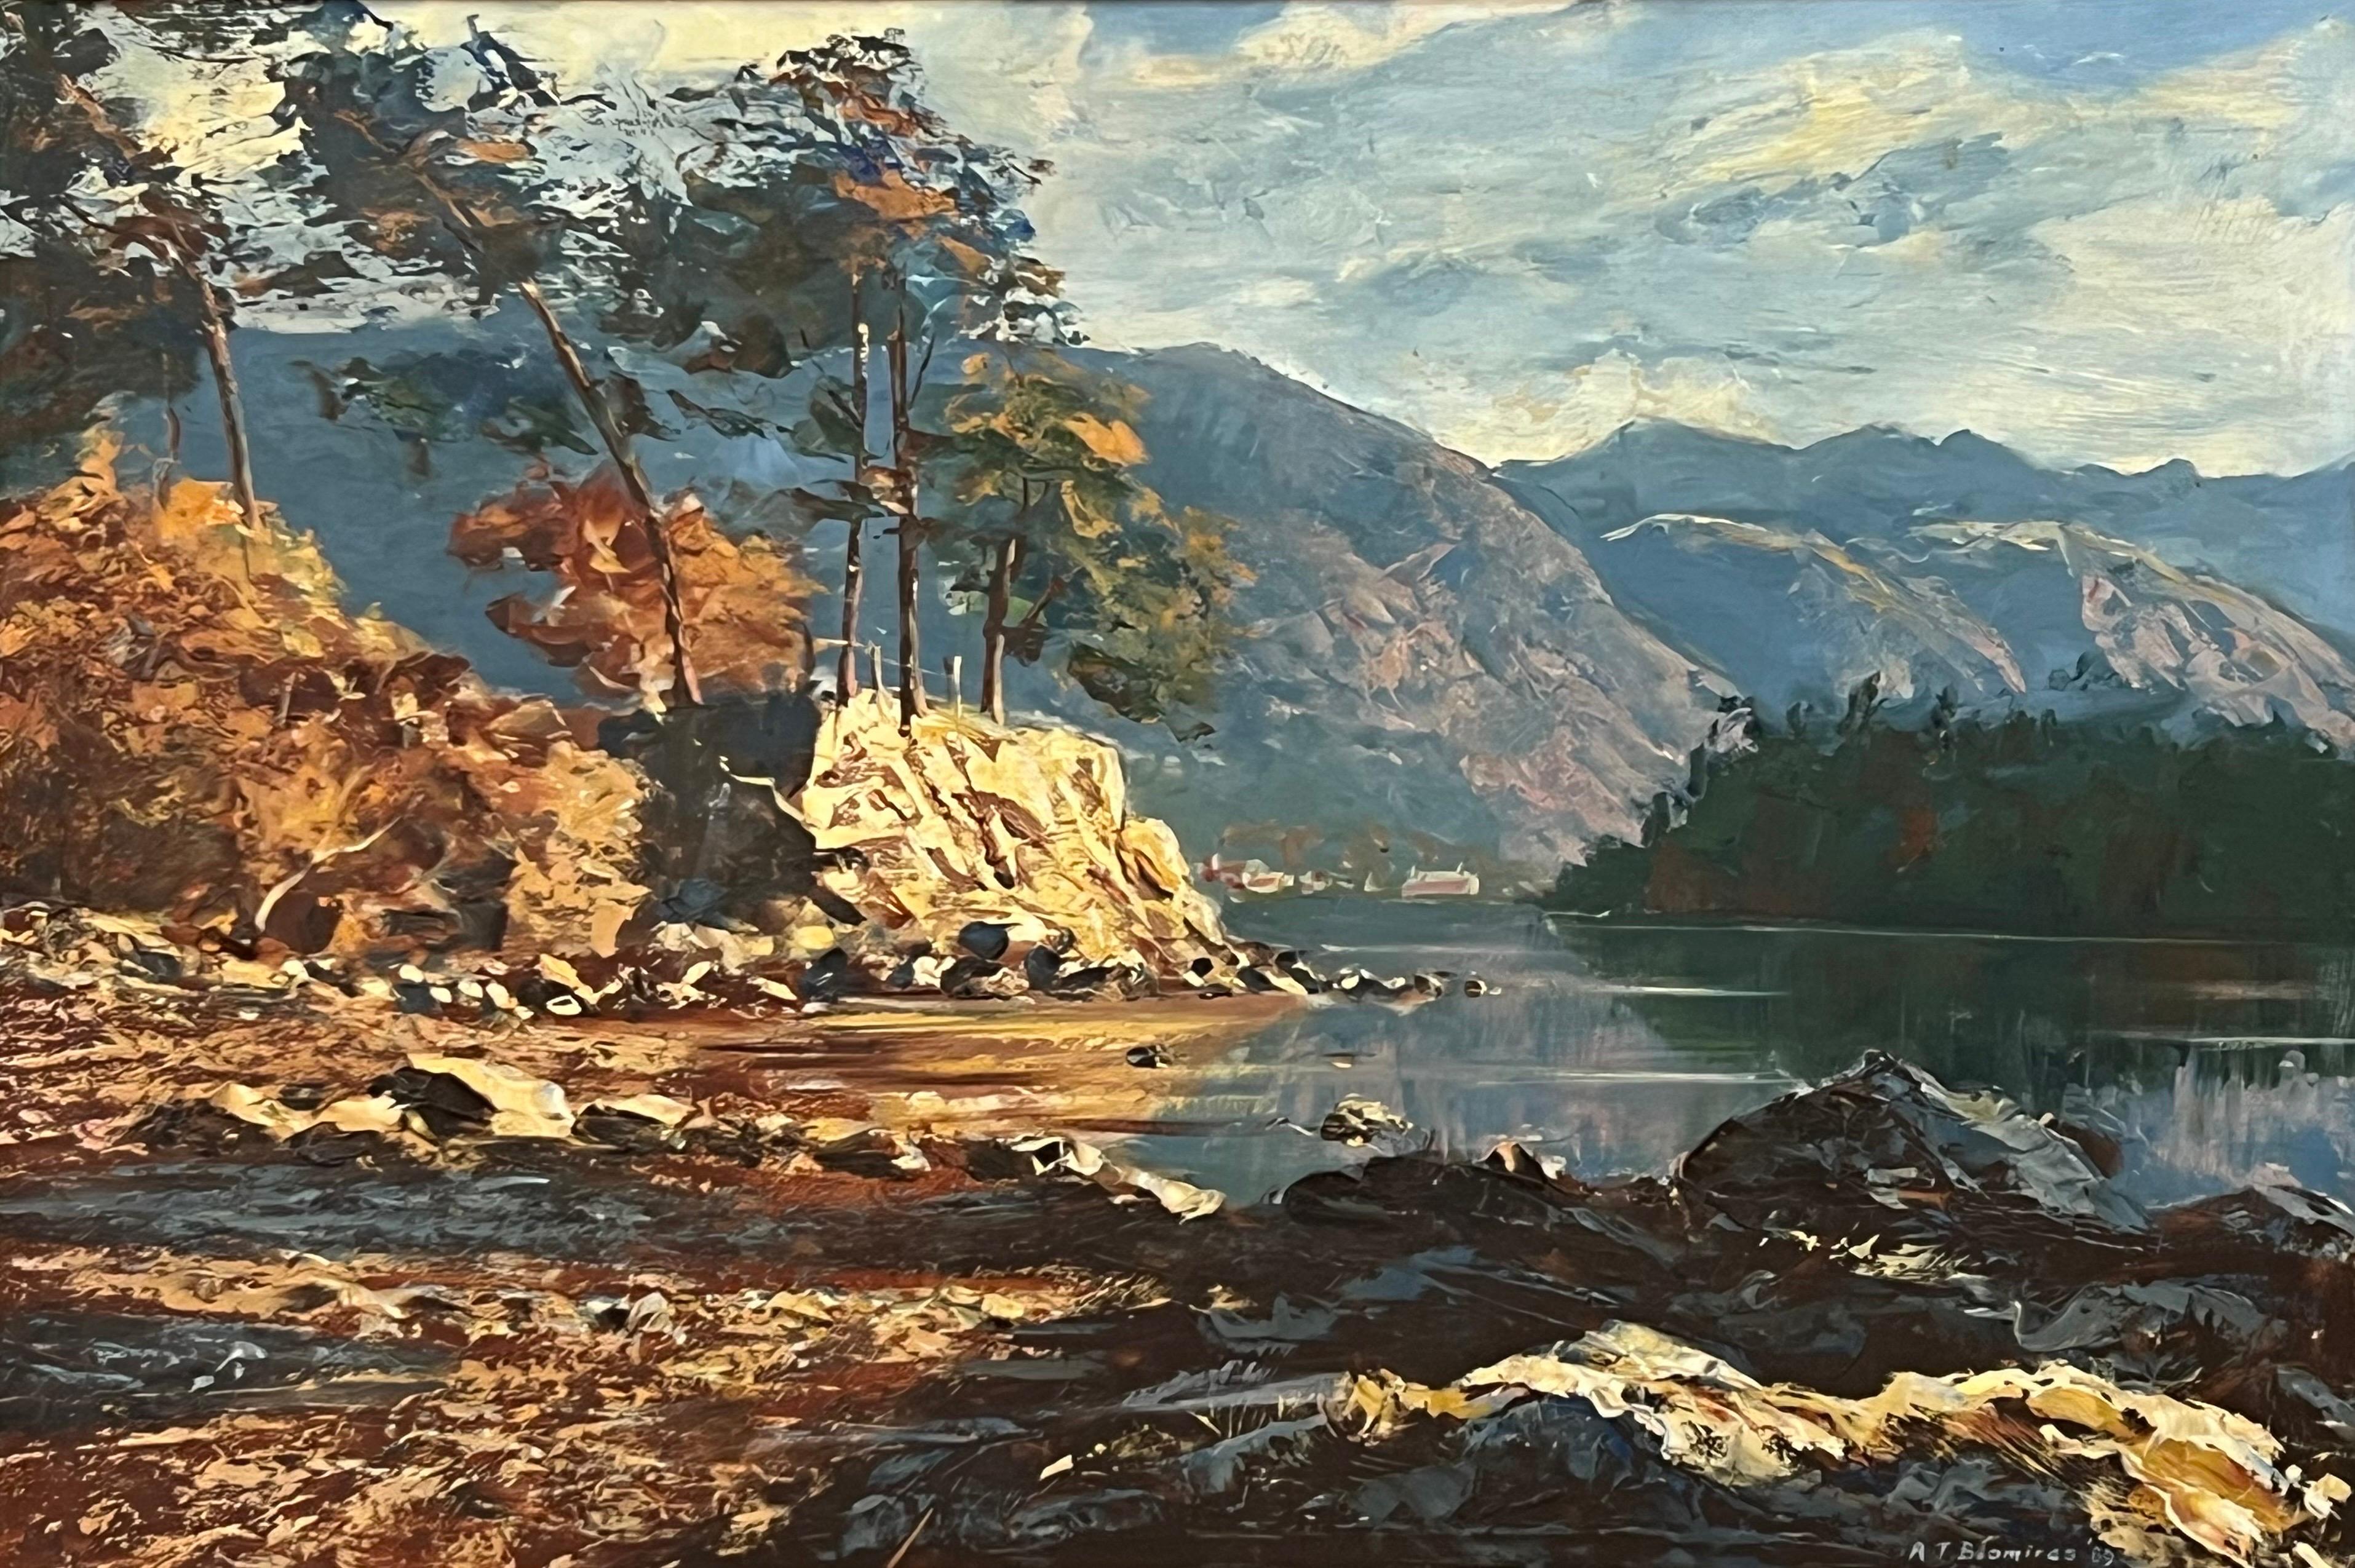 Oil Painting of Derwent Water English Lake District by British Landscape Artist For Sale 7